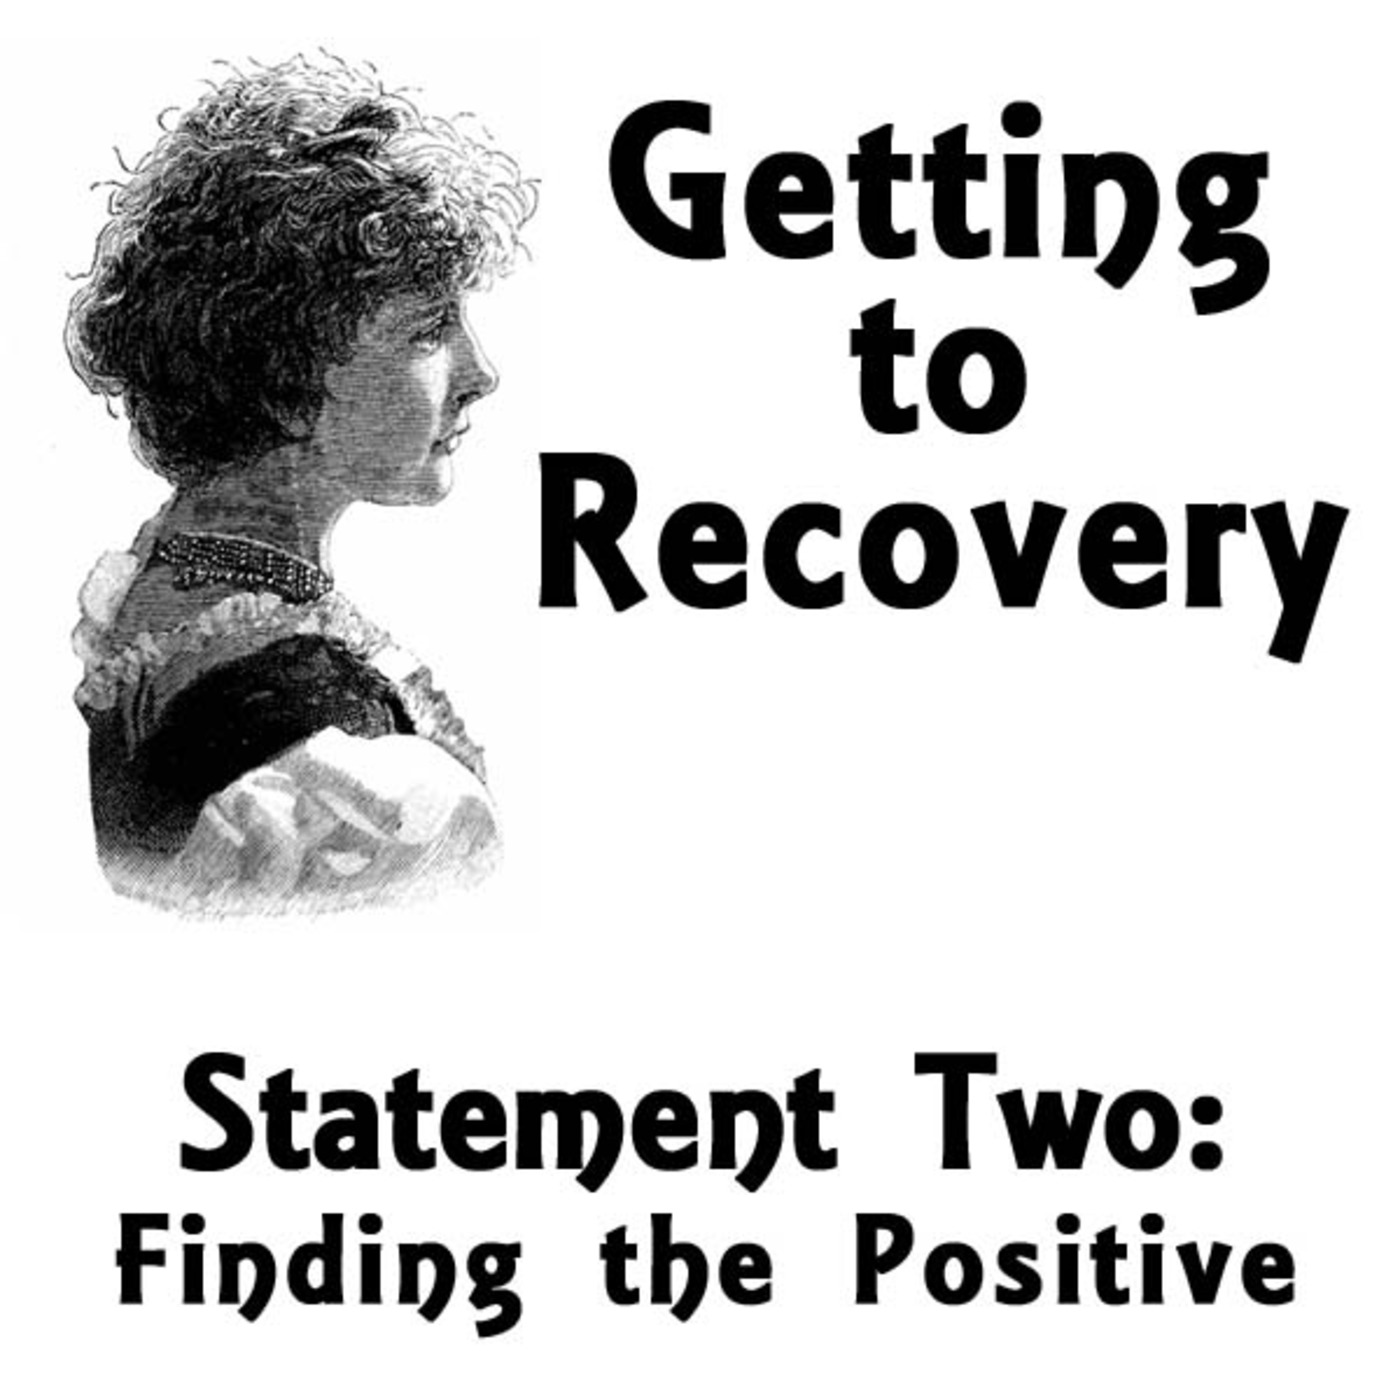 Statement Two: Finding the Positive